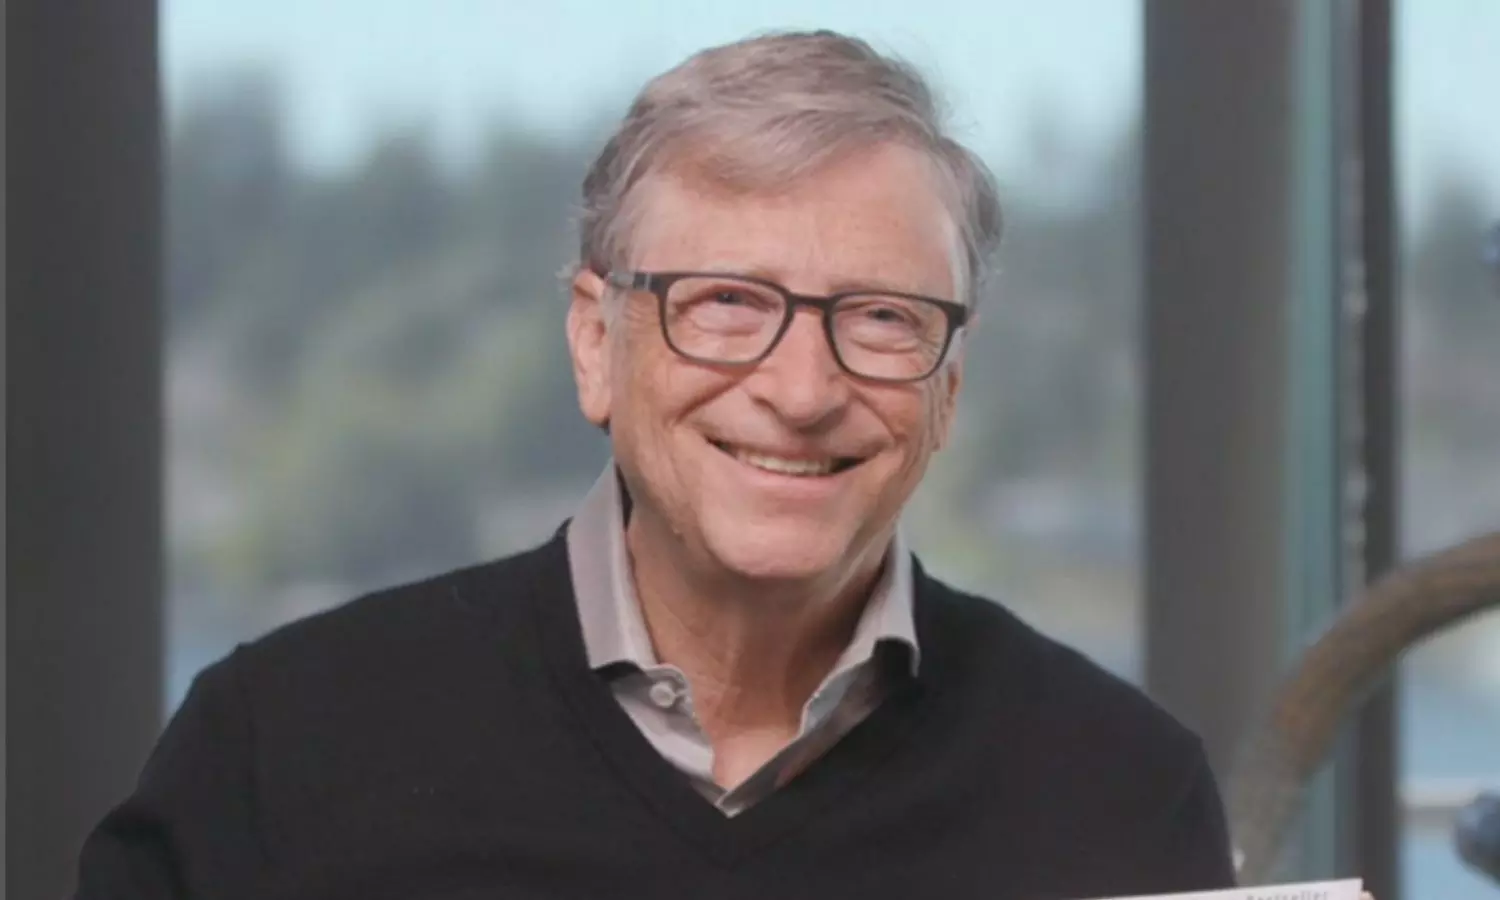 Bill Gates blasts cryptocurrencies, NFTs as based on greater-fool theory